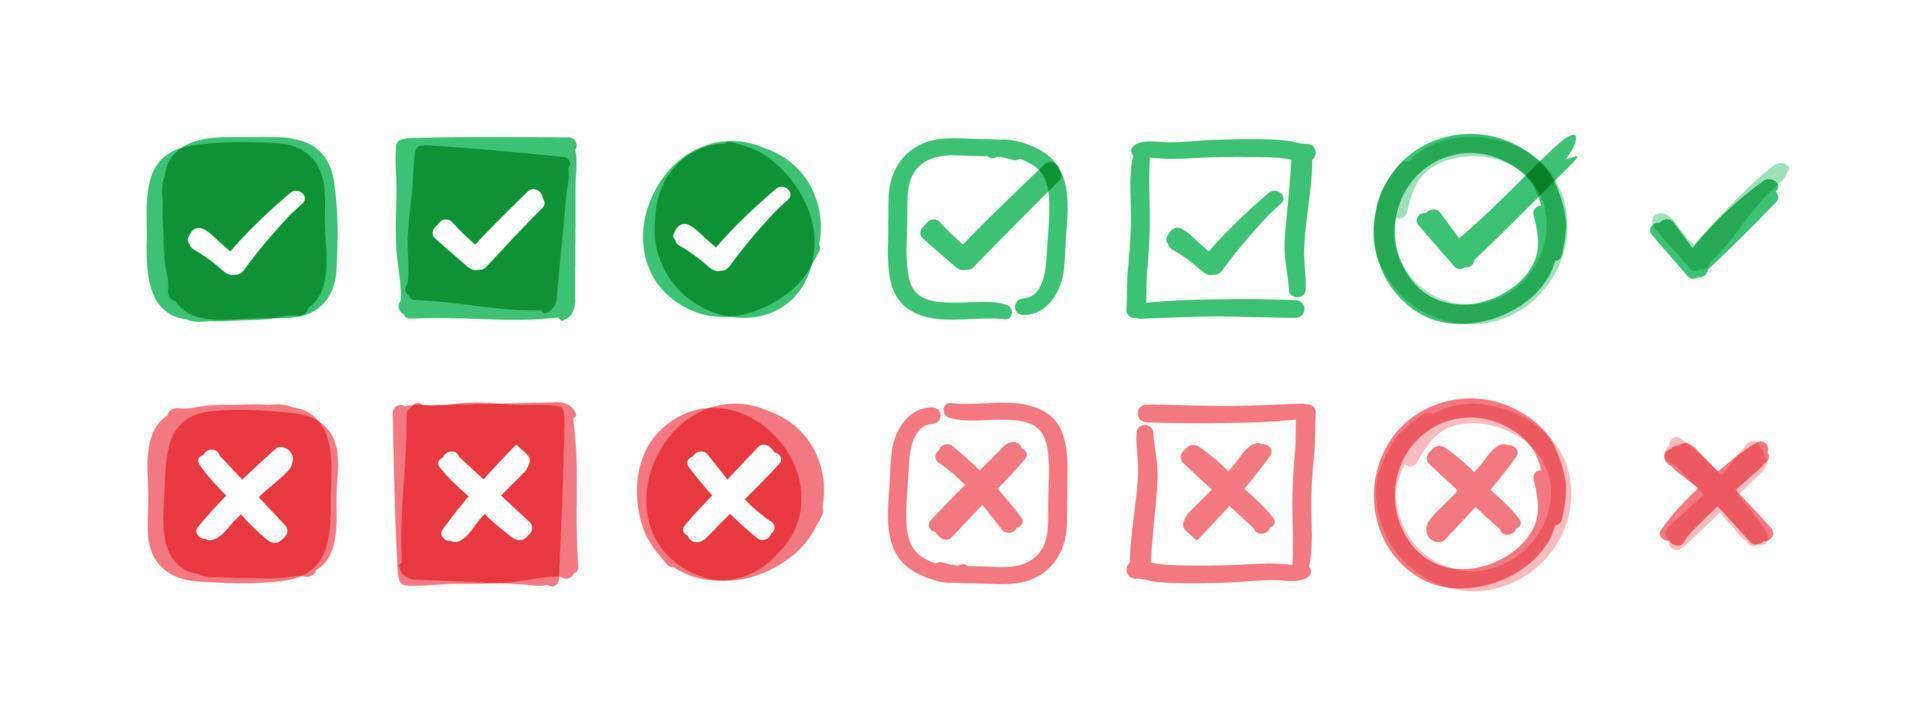 Hand Drawn Green Check Mark and Red Cross, Isolated Icon Set. Symbols in Square and Circles. Felt Tip Pen Tick Symbol in Green Color, X in Red, Vector Illustration.